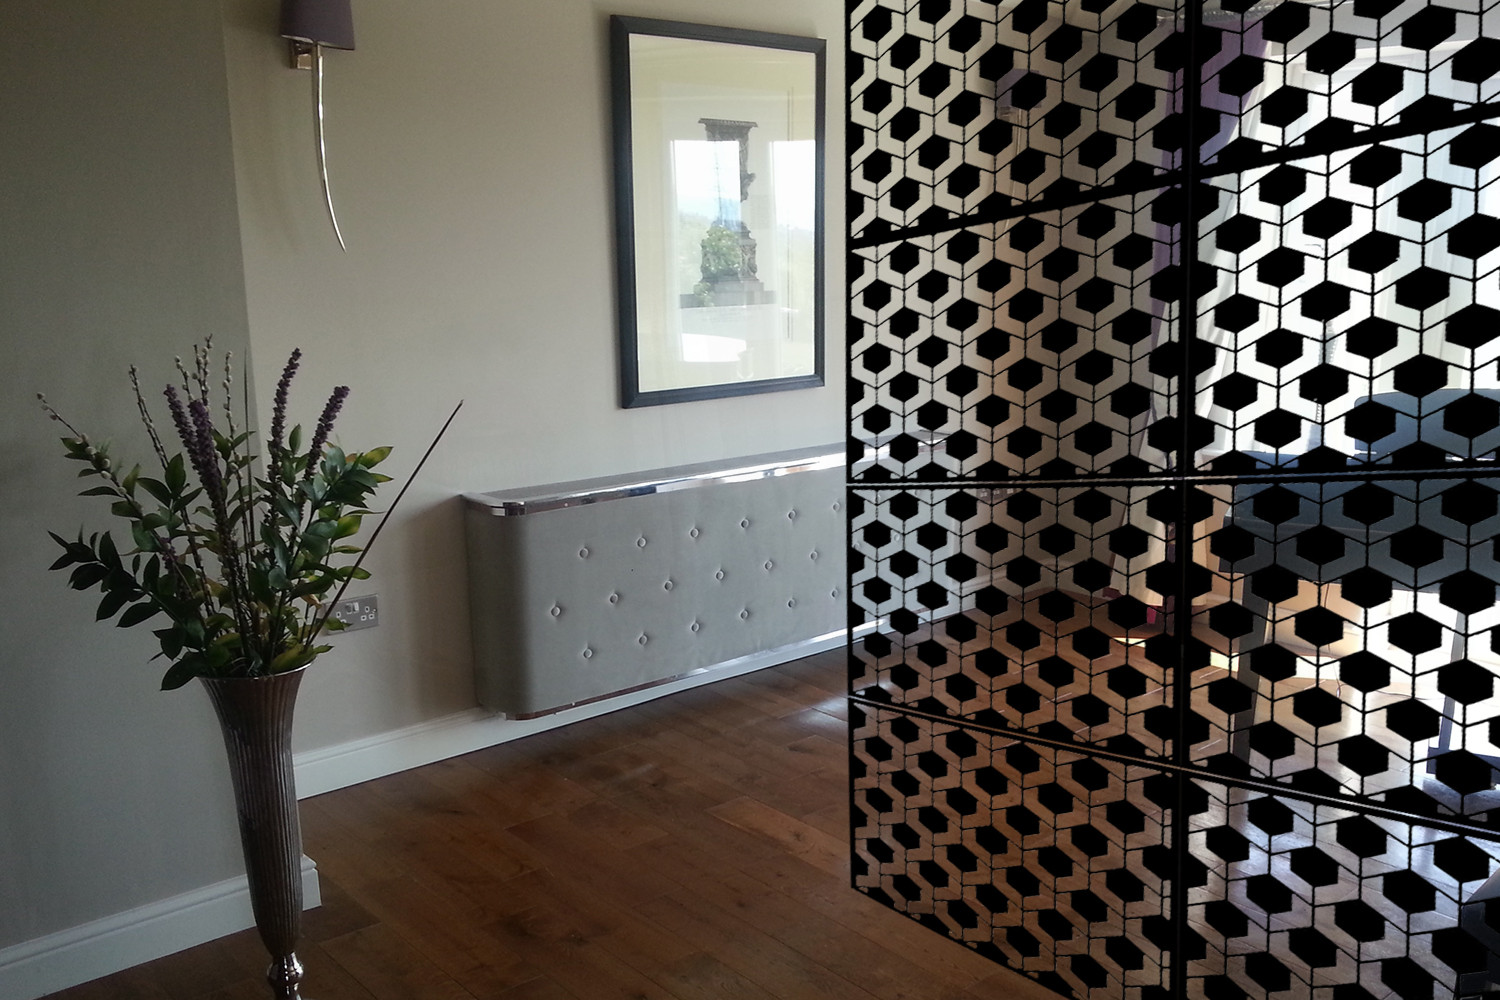 Laser cut room dividers in geometric patterns - Modern - Other - by Couture  Cases Ltd | Houzz